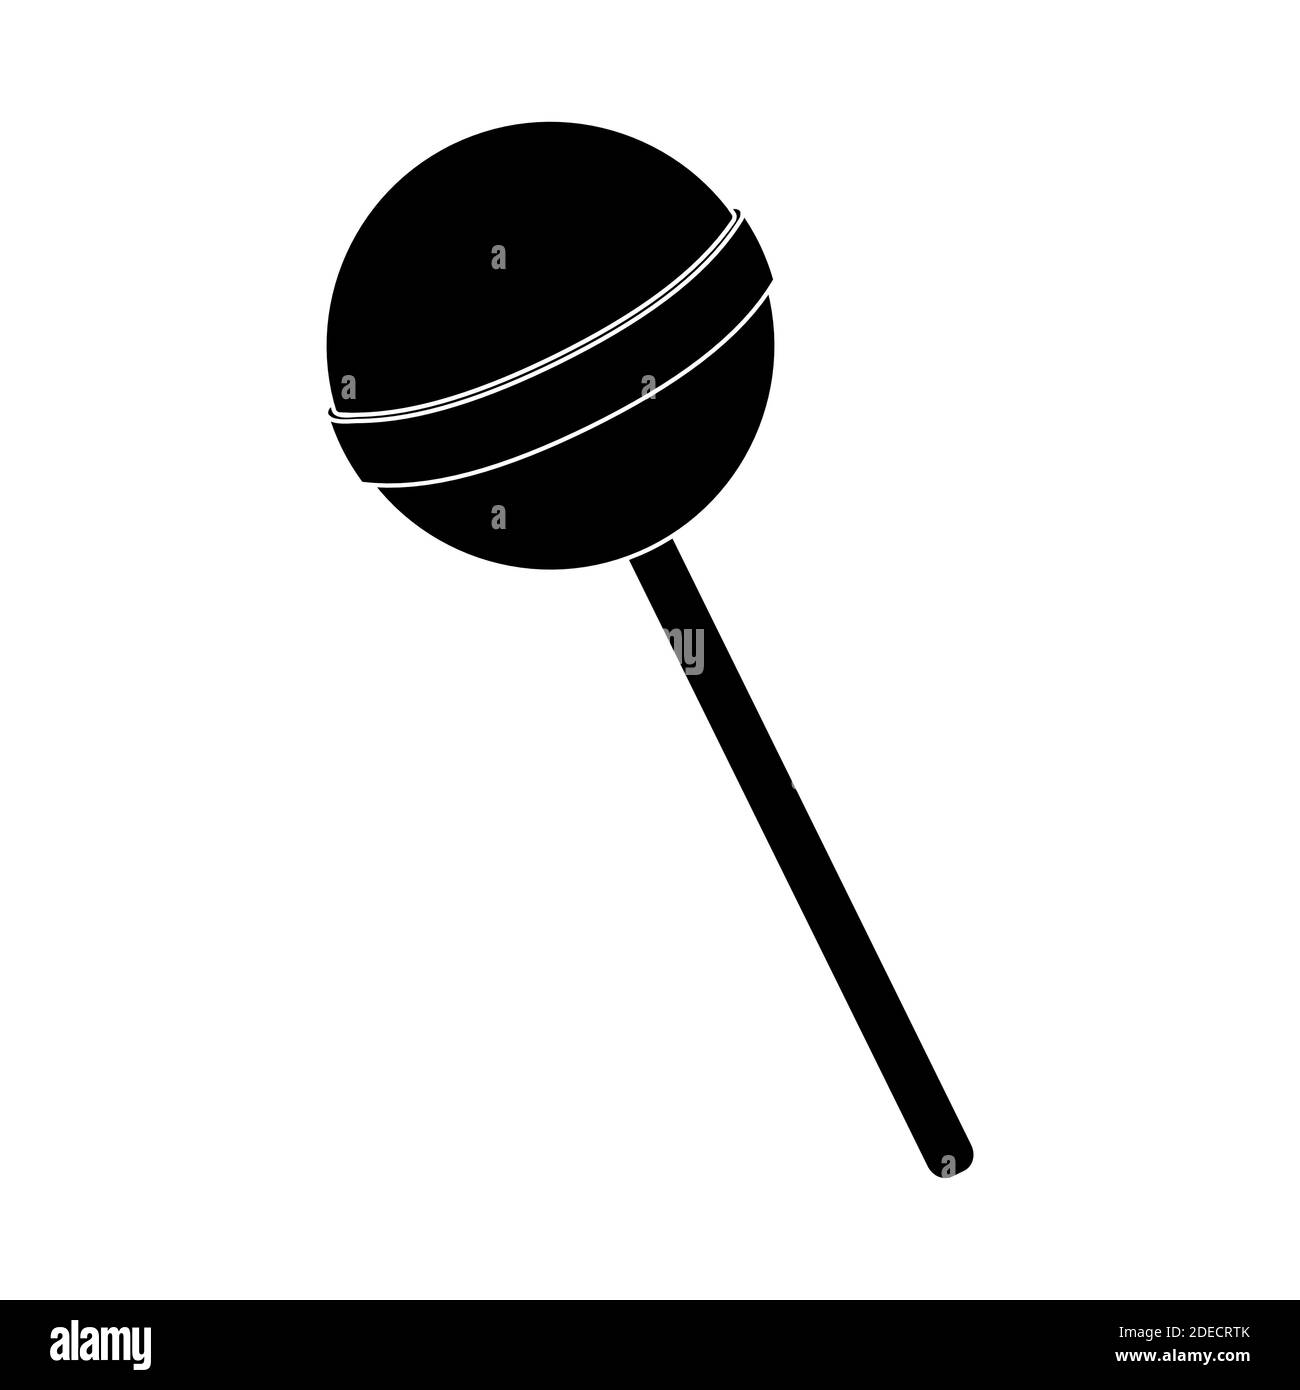 Lollipop silhouette illustration. Round black popsicle. Vector isolated on white background. Lolly shape. Child pop candy snacks icon. Stock Vector